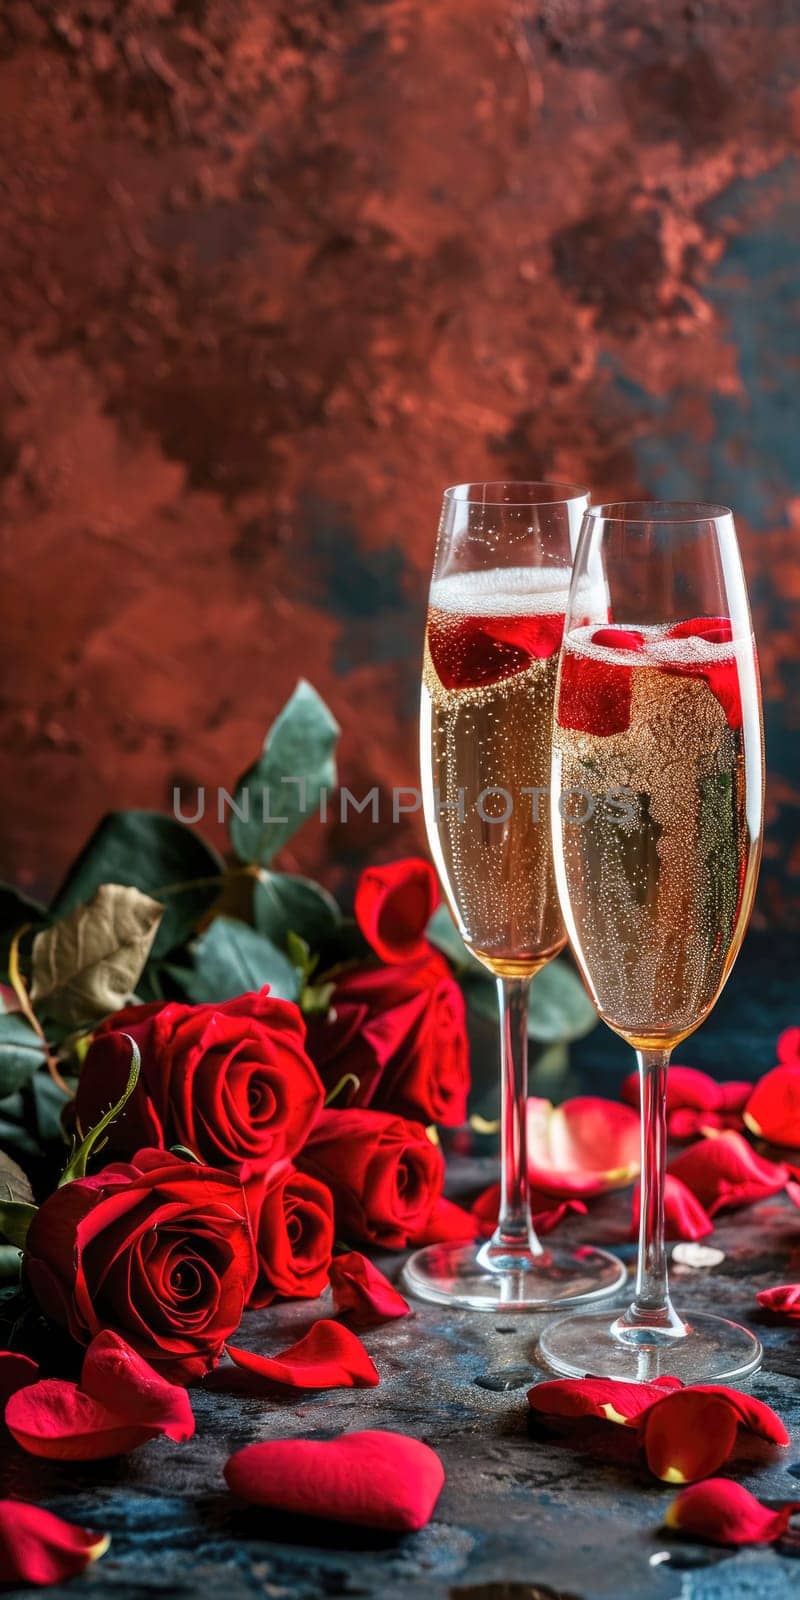 Valentine's day background with glasses of champagne and roses. Vertical banner or greeting card for smartphone